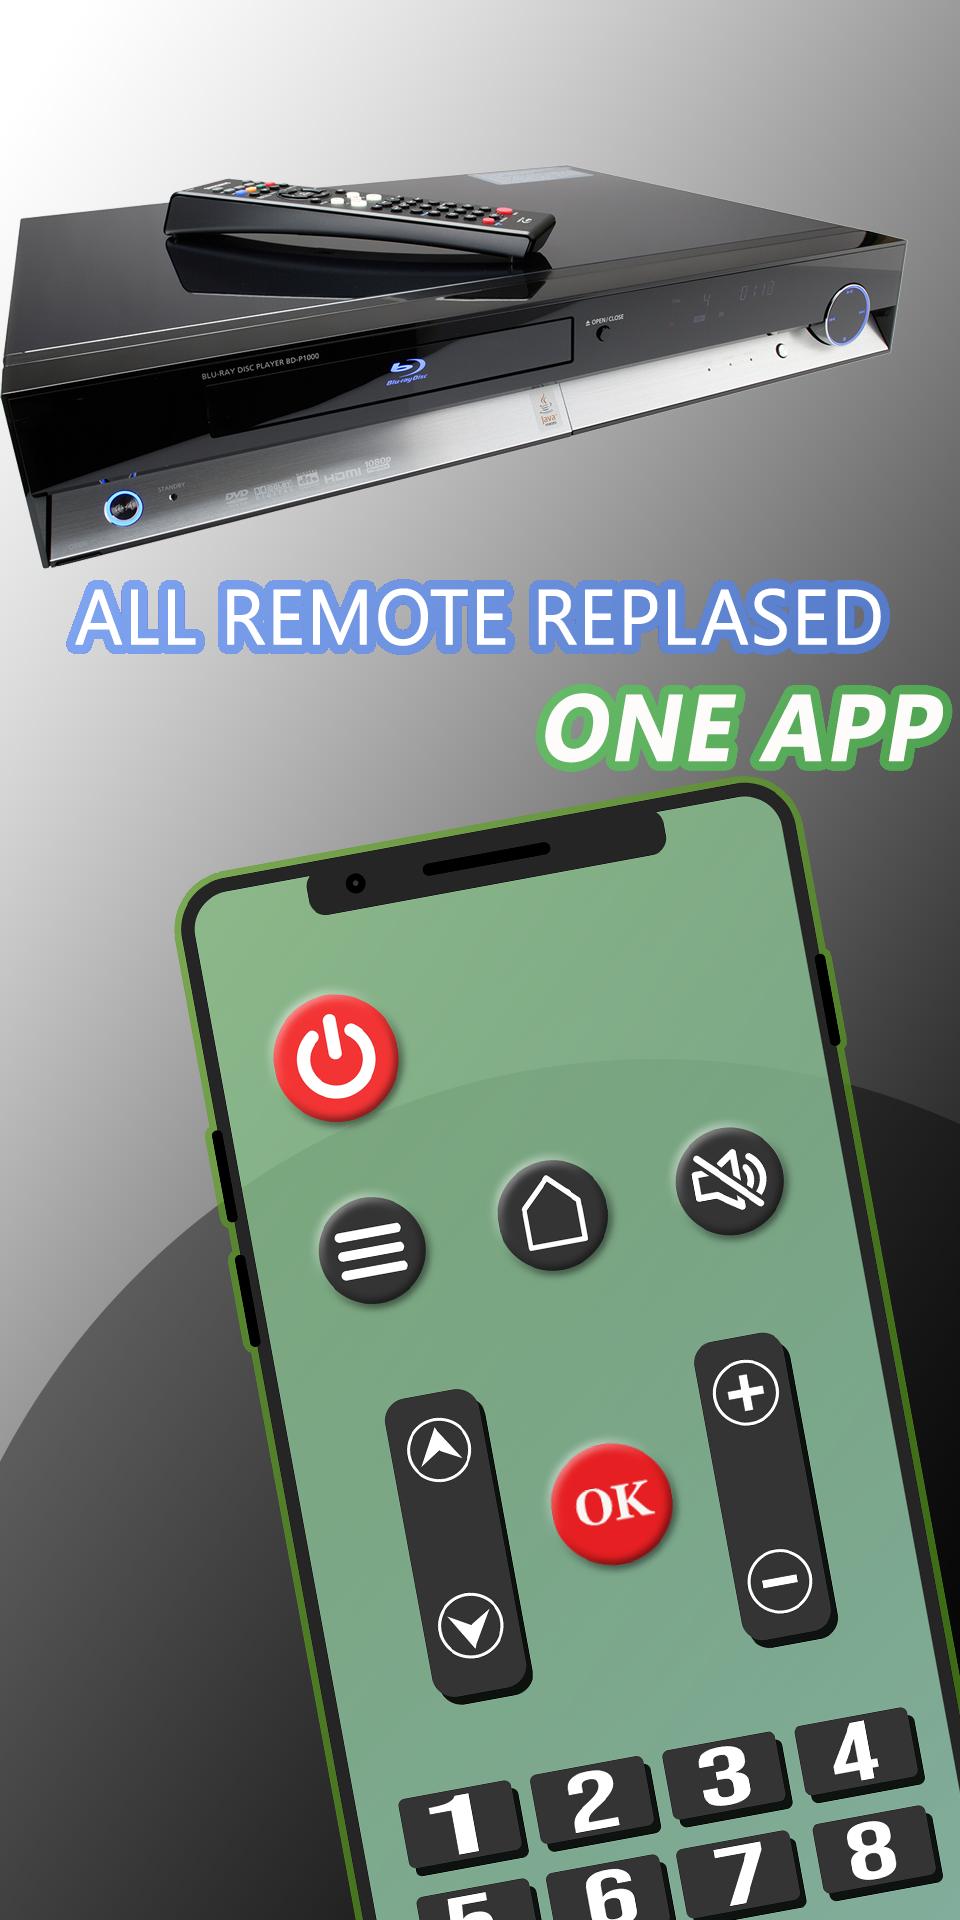 Universal DVD Remote Control - All DVD APK pour Android Télécharger